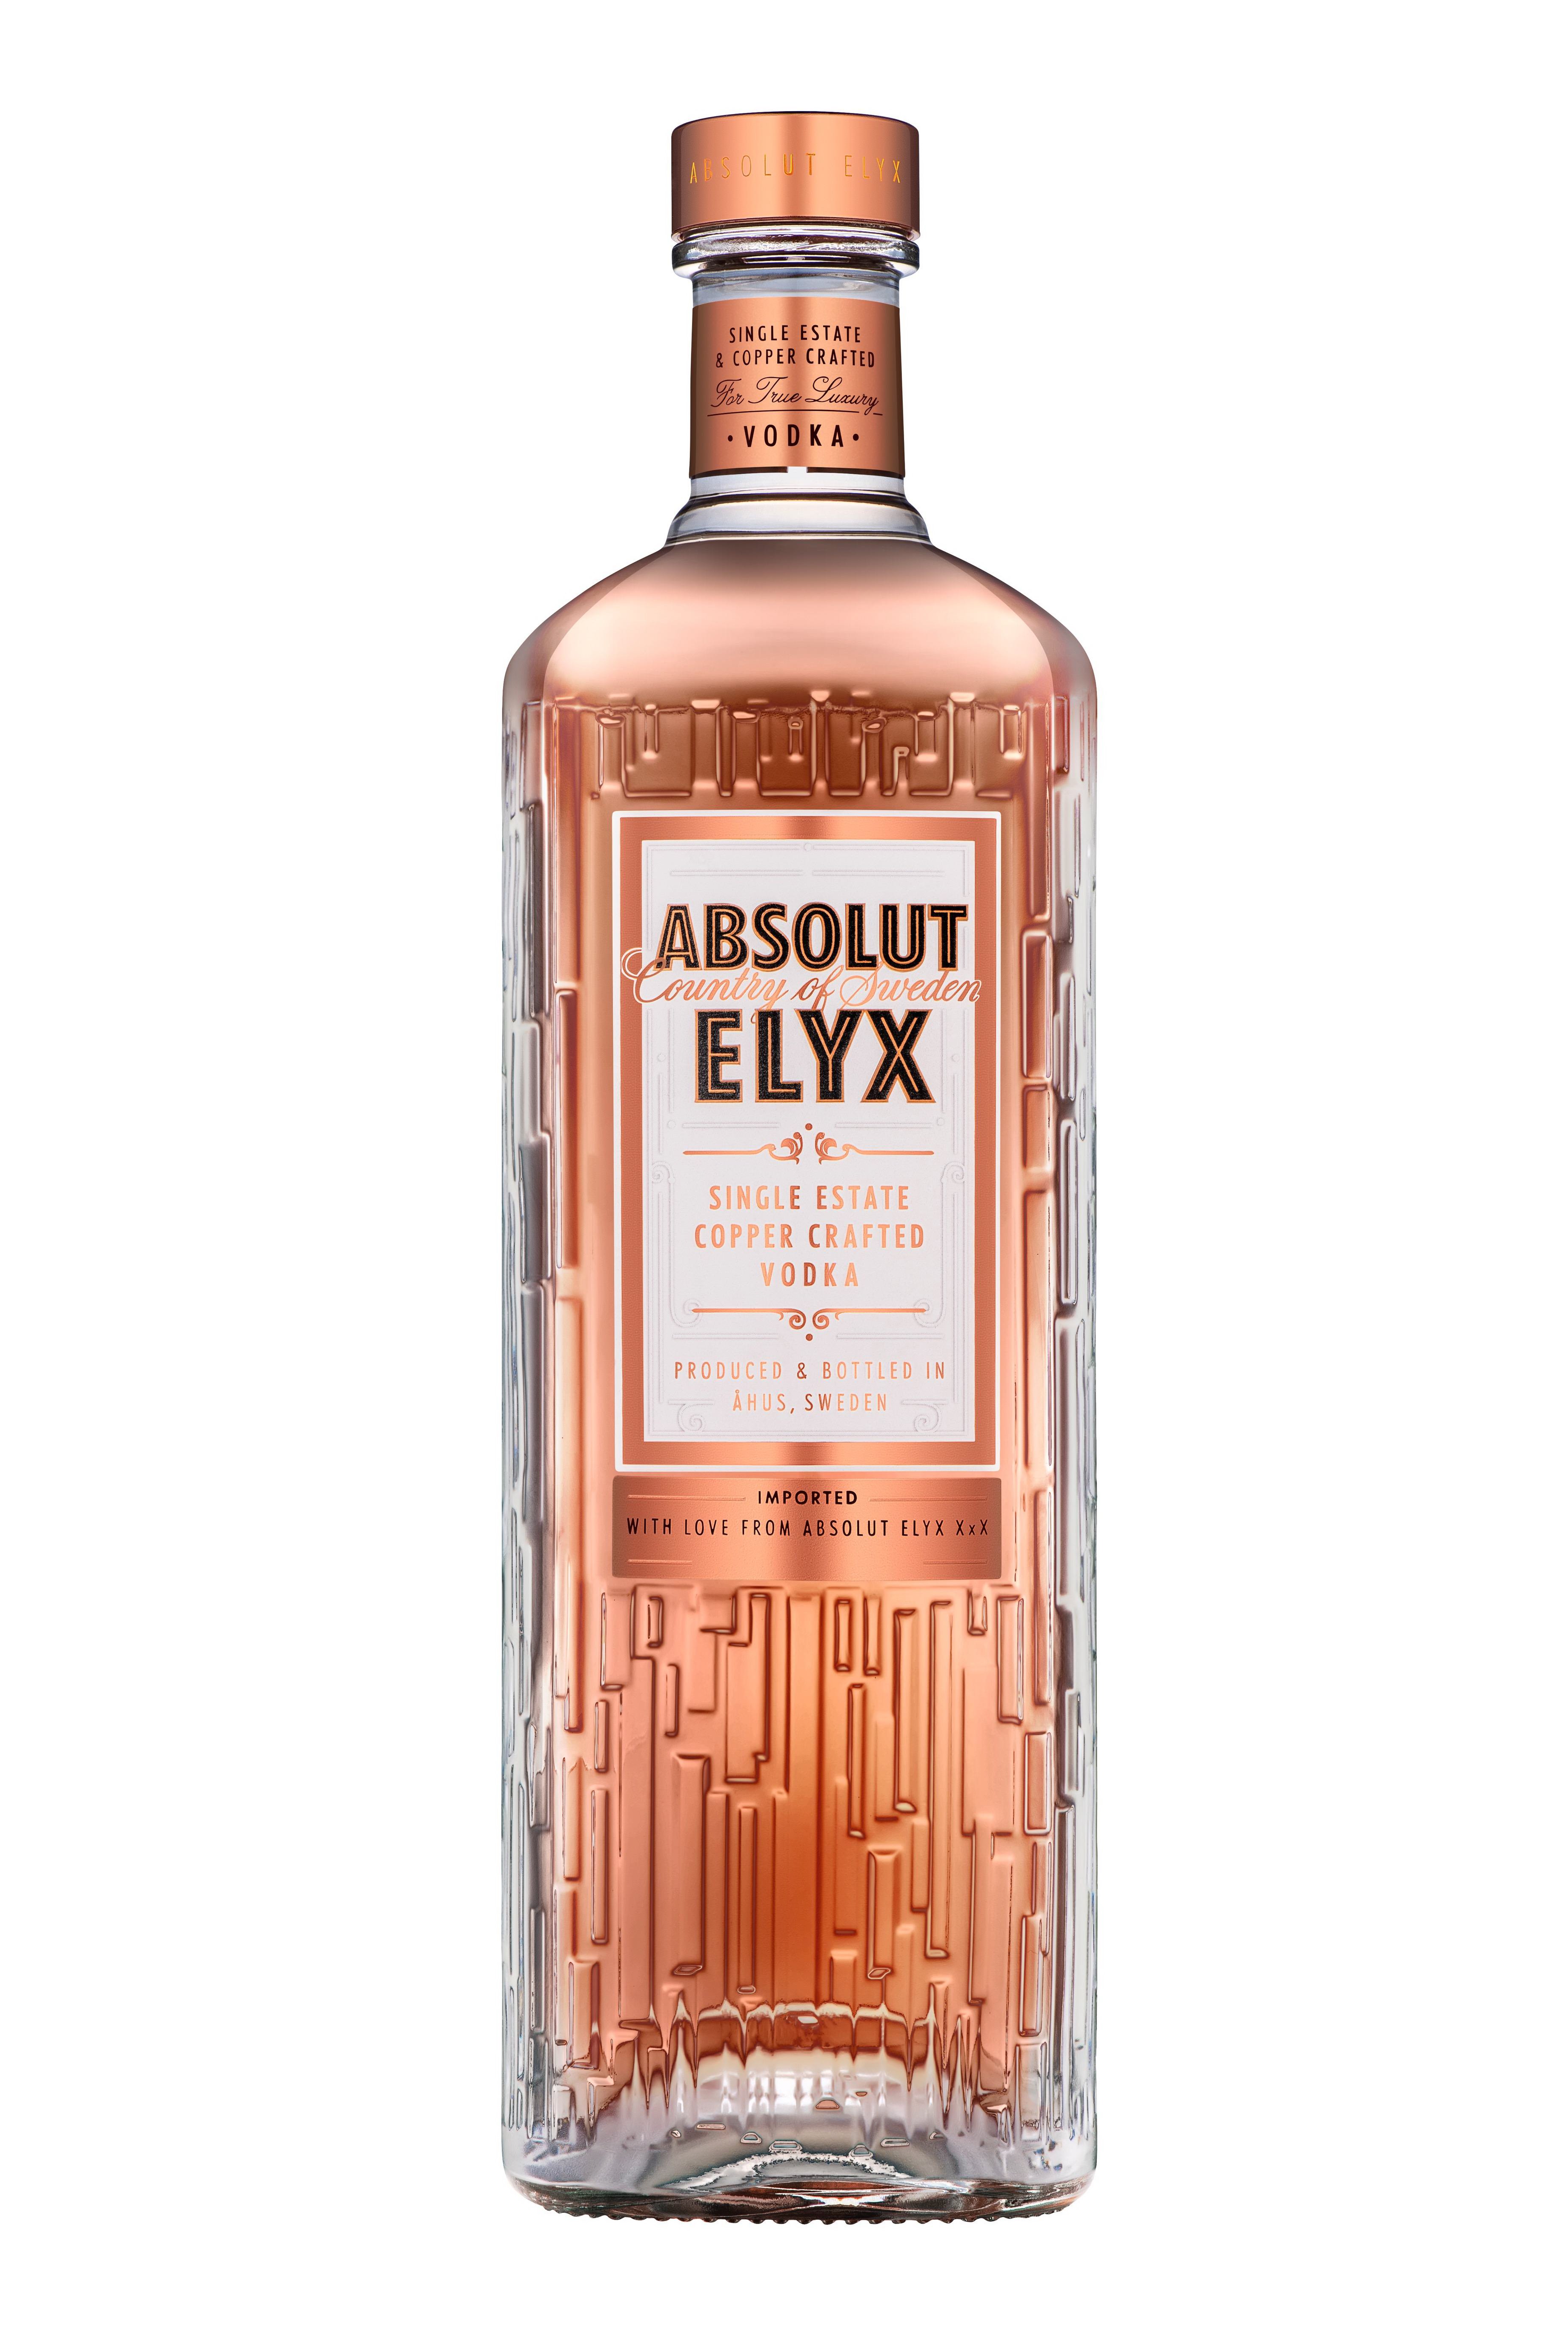  ABSOLUT ELYX SINGLE ESTATE &amp; COPPER CRAFTED FOR TRUE LUXURY VODKA ABSOLUT COUNTRY OF SWEDEN ELYX SINGLE ESTATE COPPER CRAFTE